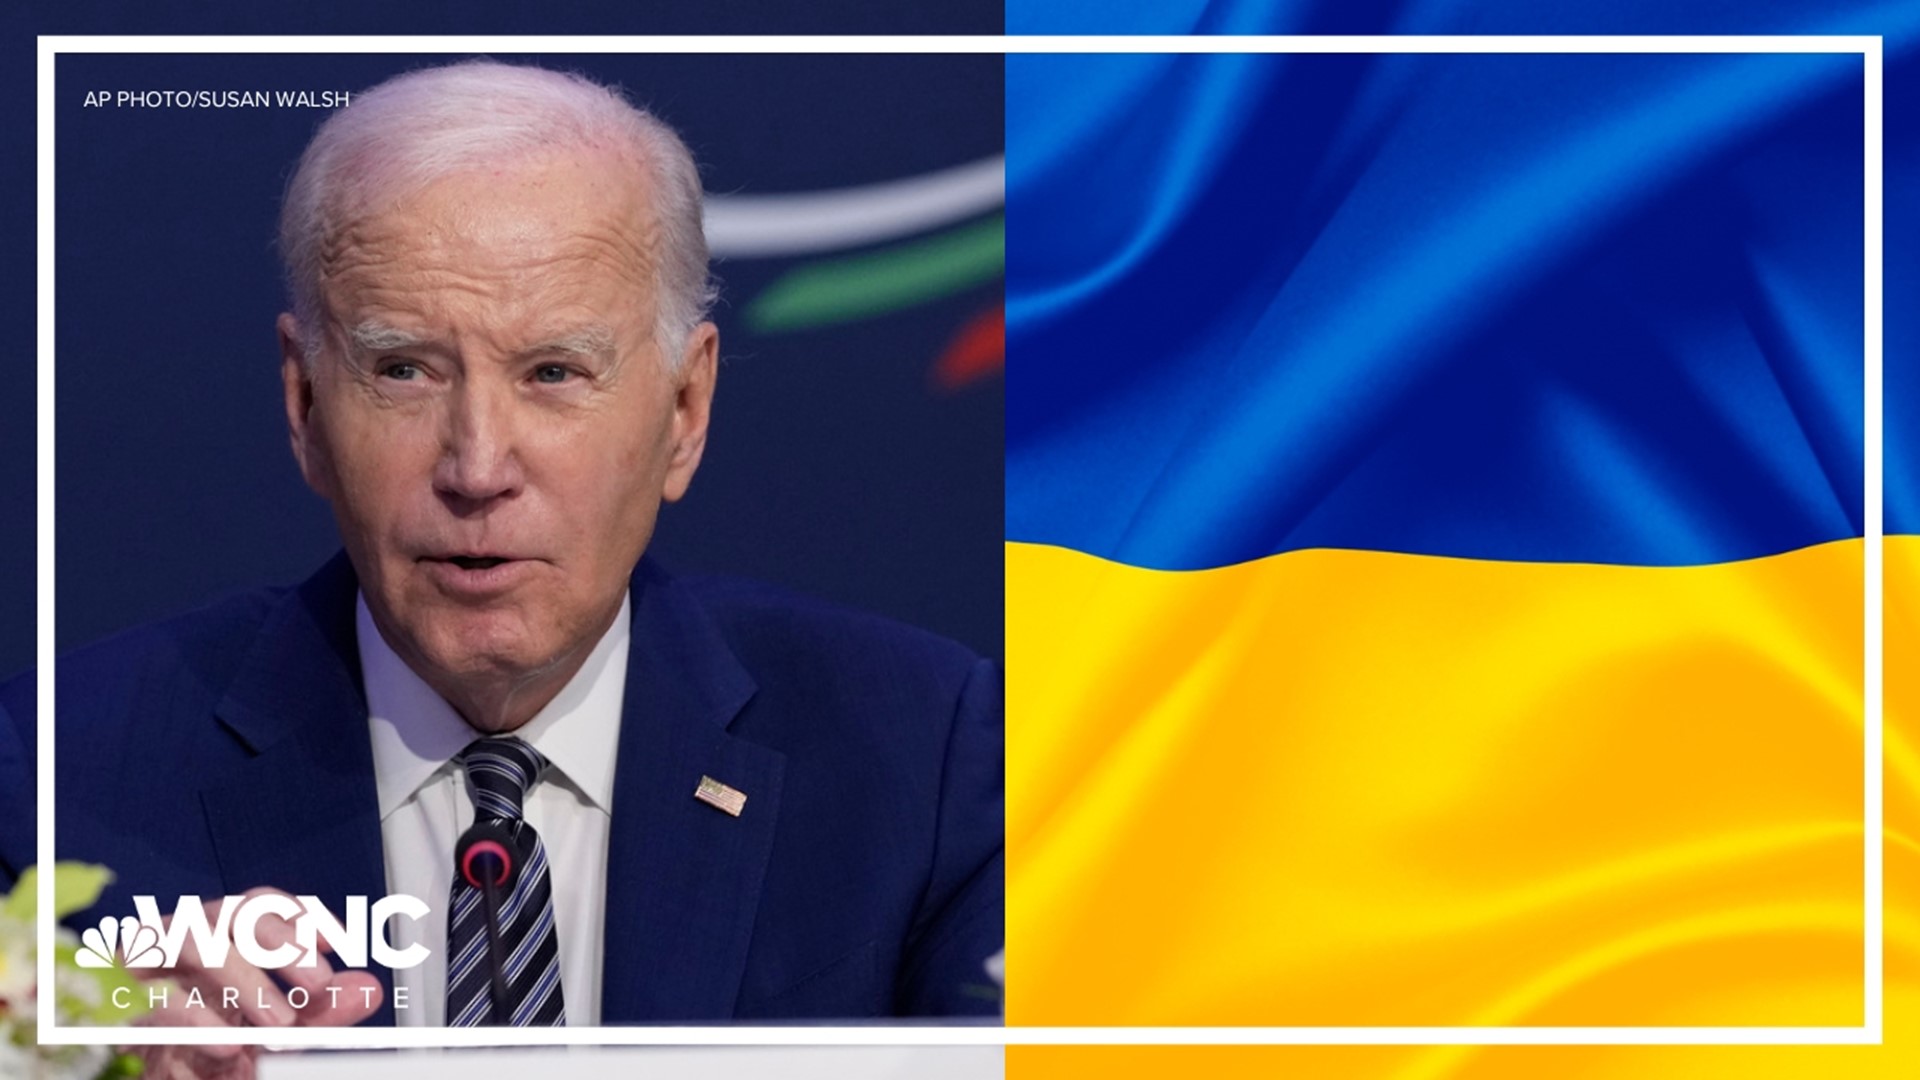 President Joe Biden and Ukrainian President Volodymyr Zelenskyy make impassioned pleas to the United Nations urging world leaders to continue support for Ukraine.